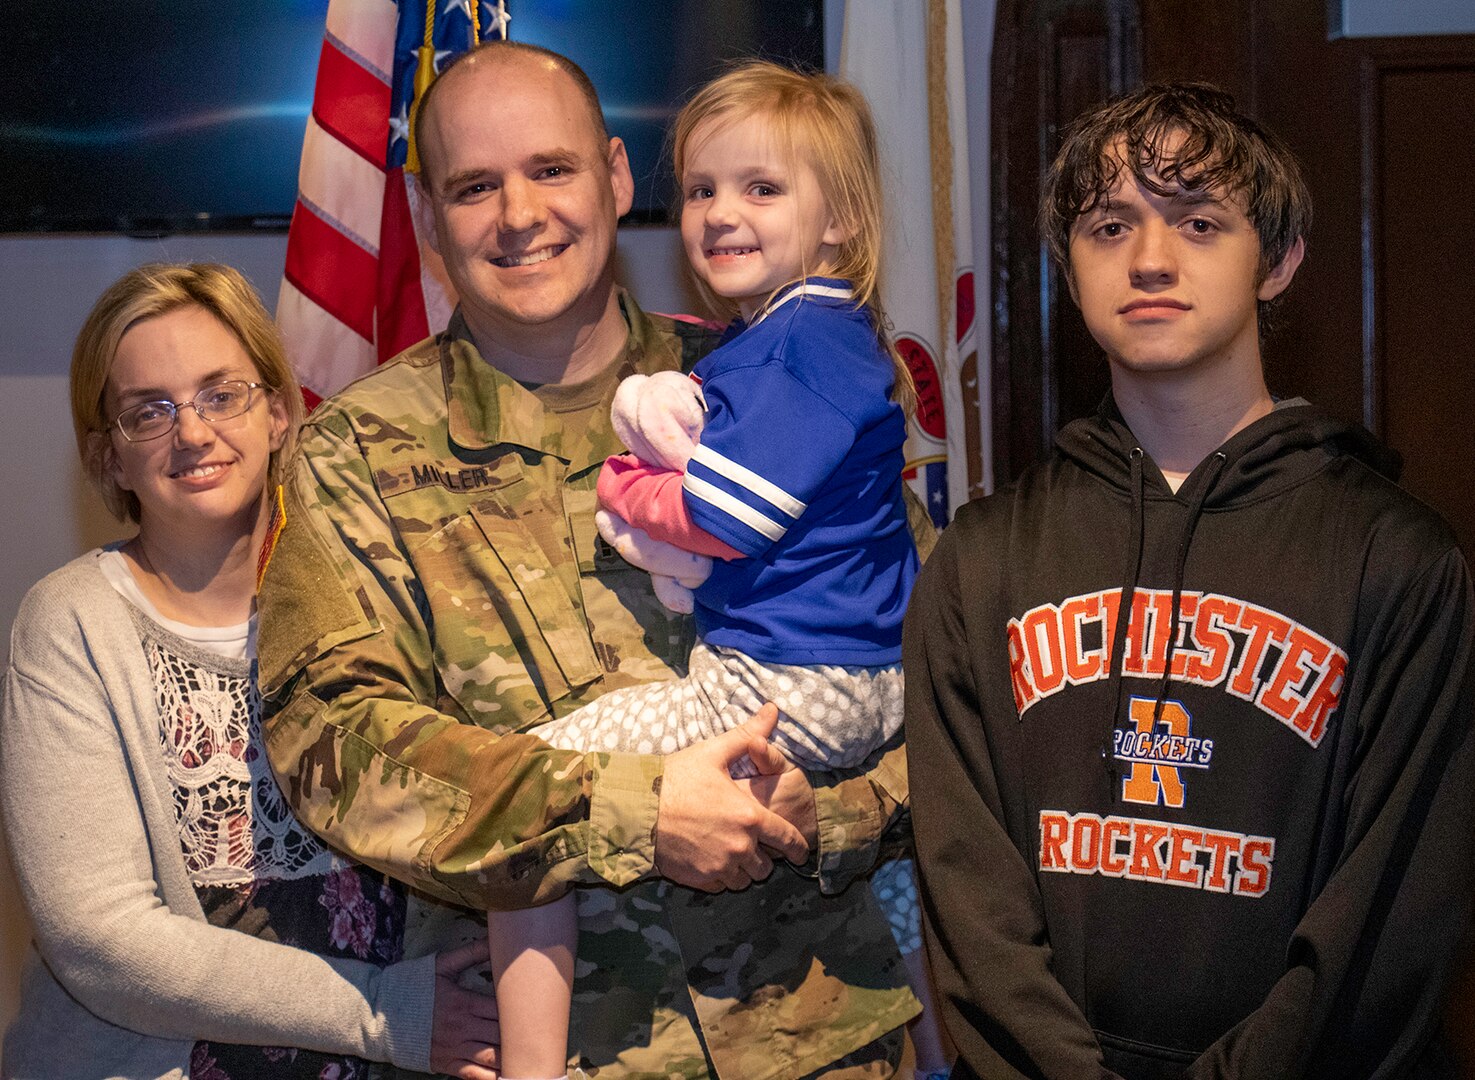 Newly promoted Chief Warrant Officer 4 David Miller, Jr., with wife, Teresa, daughter Elizabeth and son, Alex.